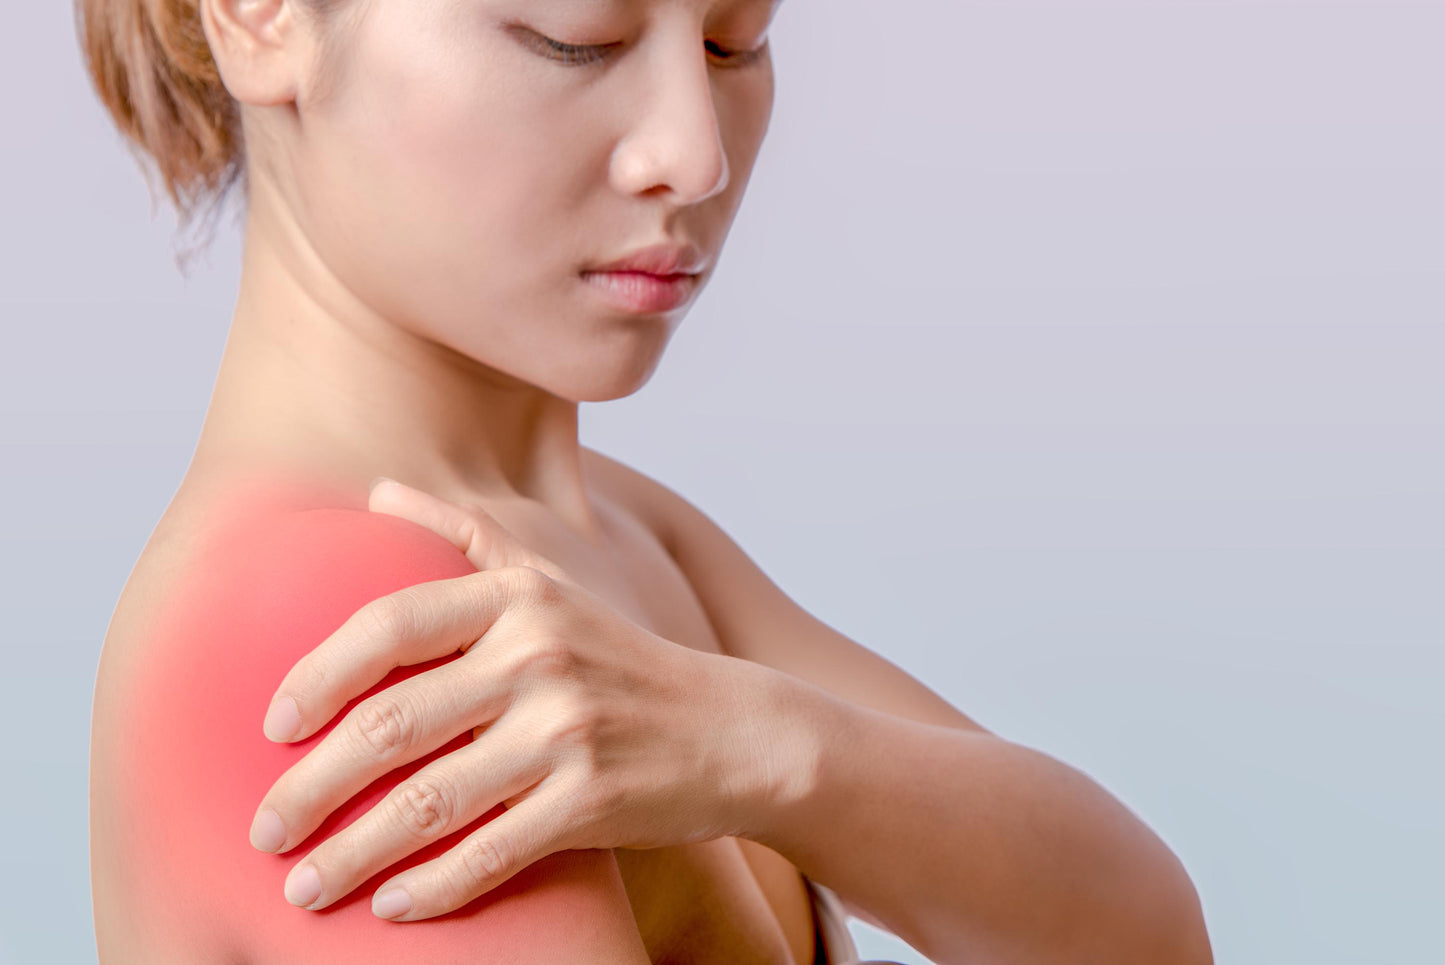 Massage Oil for Frozen Shoulder 50ml - Made by Hand in Yorkshire, Powerful Relief with St. John's Wort and Lavender Essential Oils, Natural and Effective Treatment for Frozen Shoulder